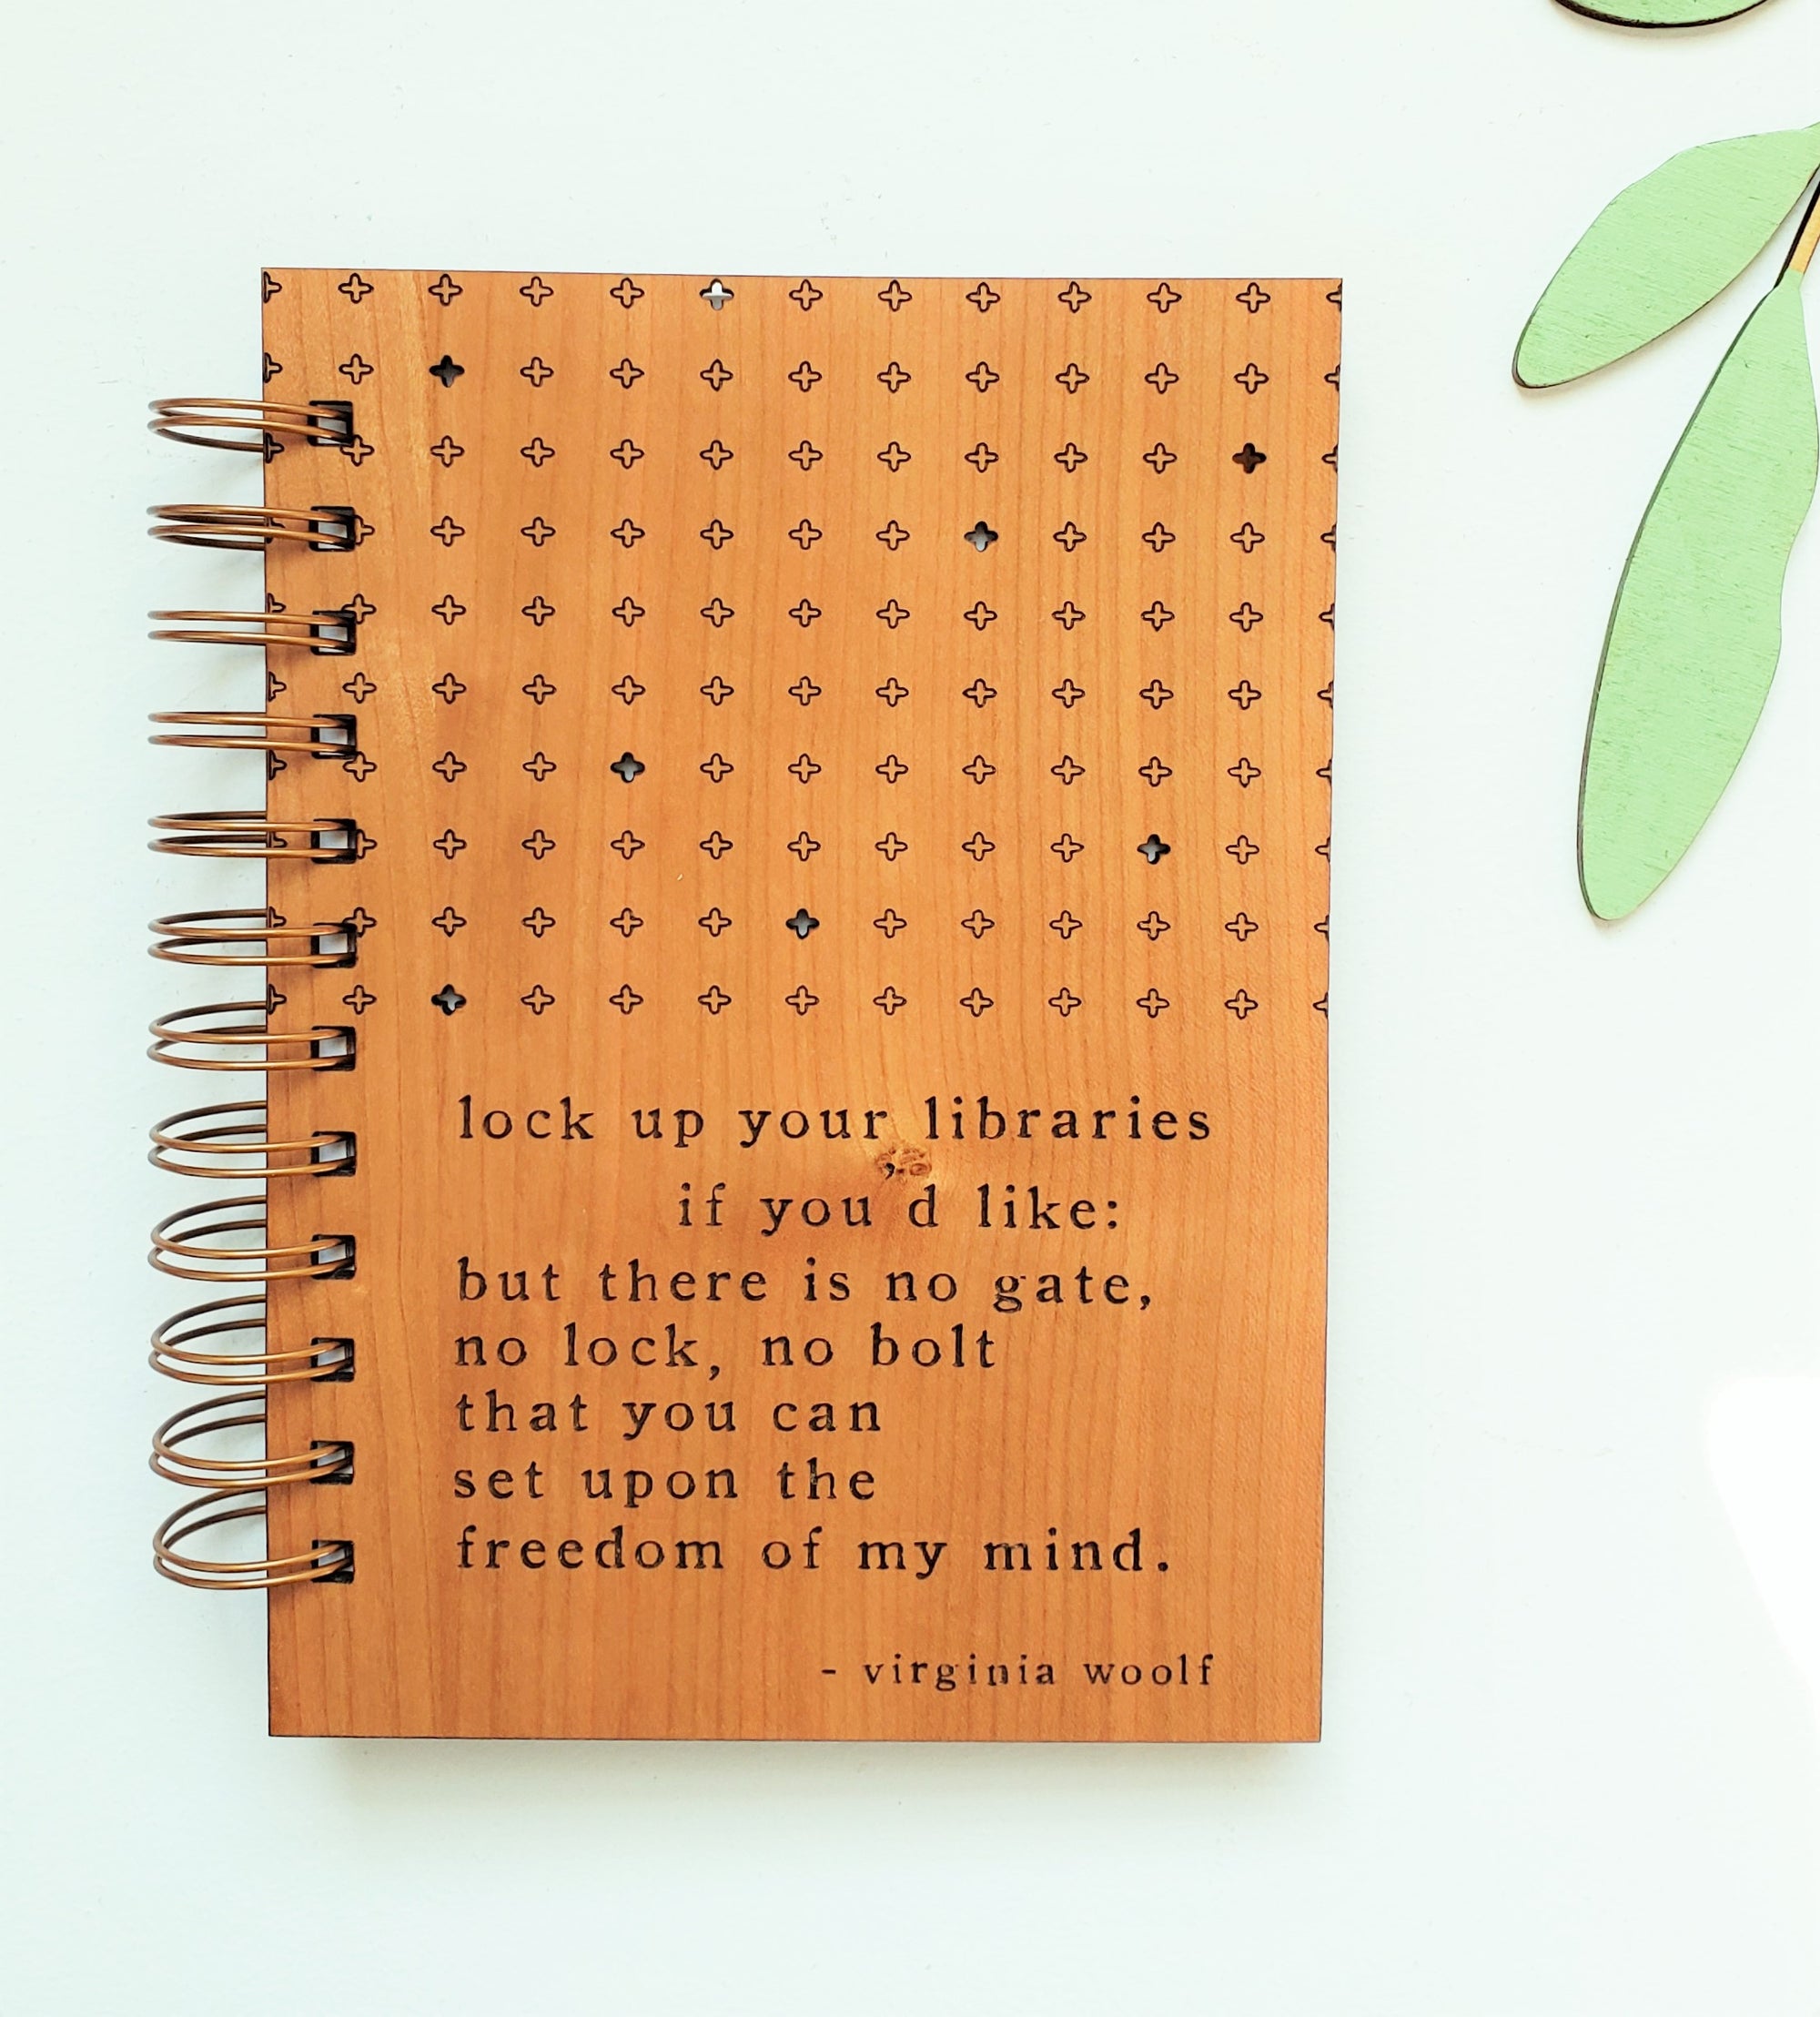 Virginia Woolf Write What You Wish To Write Unlined Notebook – Fly